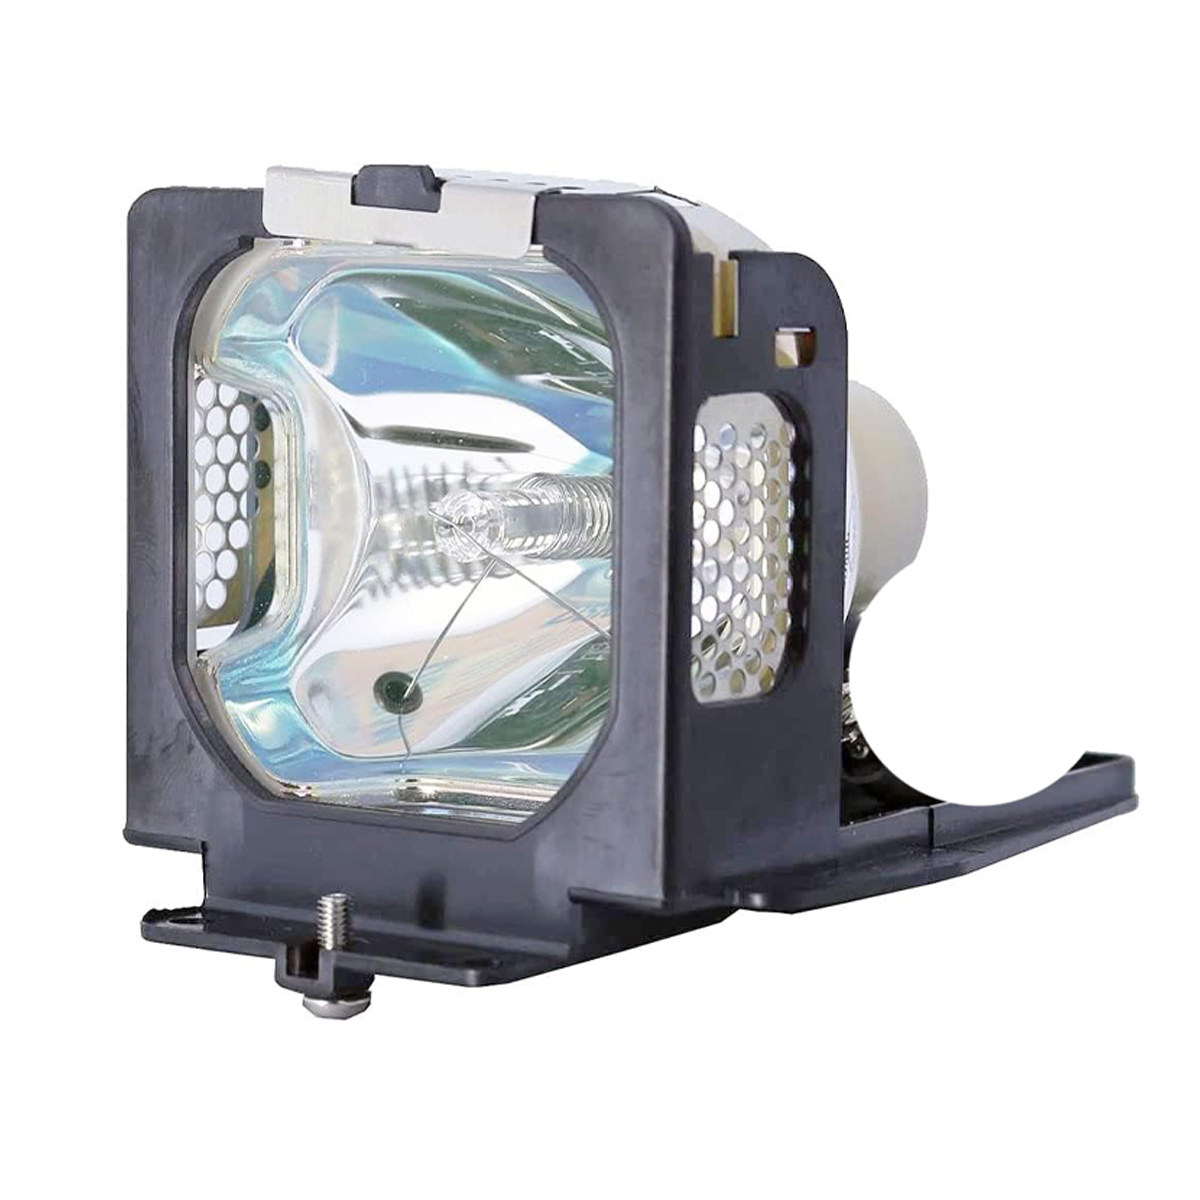 Replacement Projector lamp LV-LP18/9268A001AA For CANON LV-7210/LV-7215/ LV-7220/ LV-7225